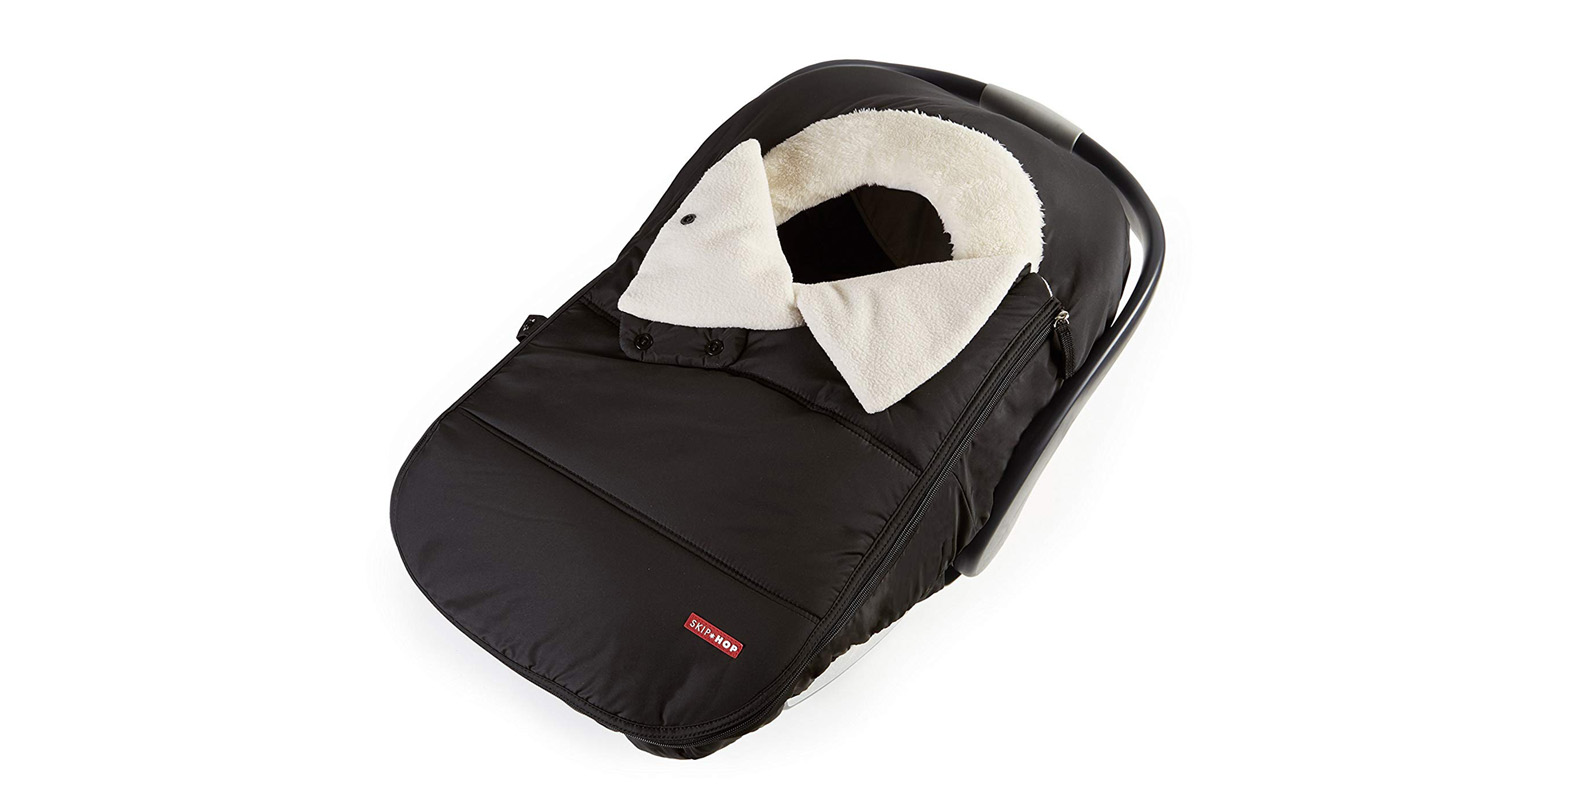 Skip Hop's Stroll & Go Winter Car Seat Cover for 30 shipped at Amazon (Reg. 40) 9to5Toys